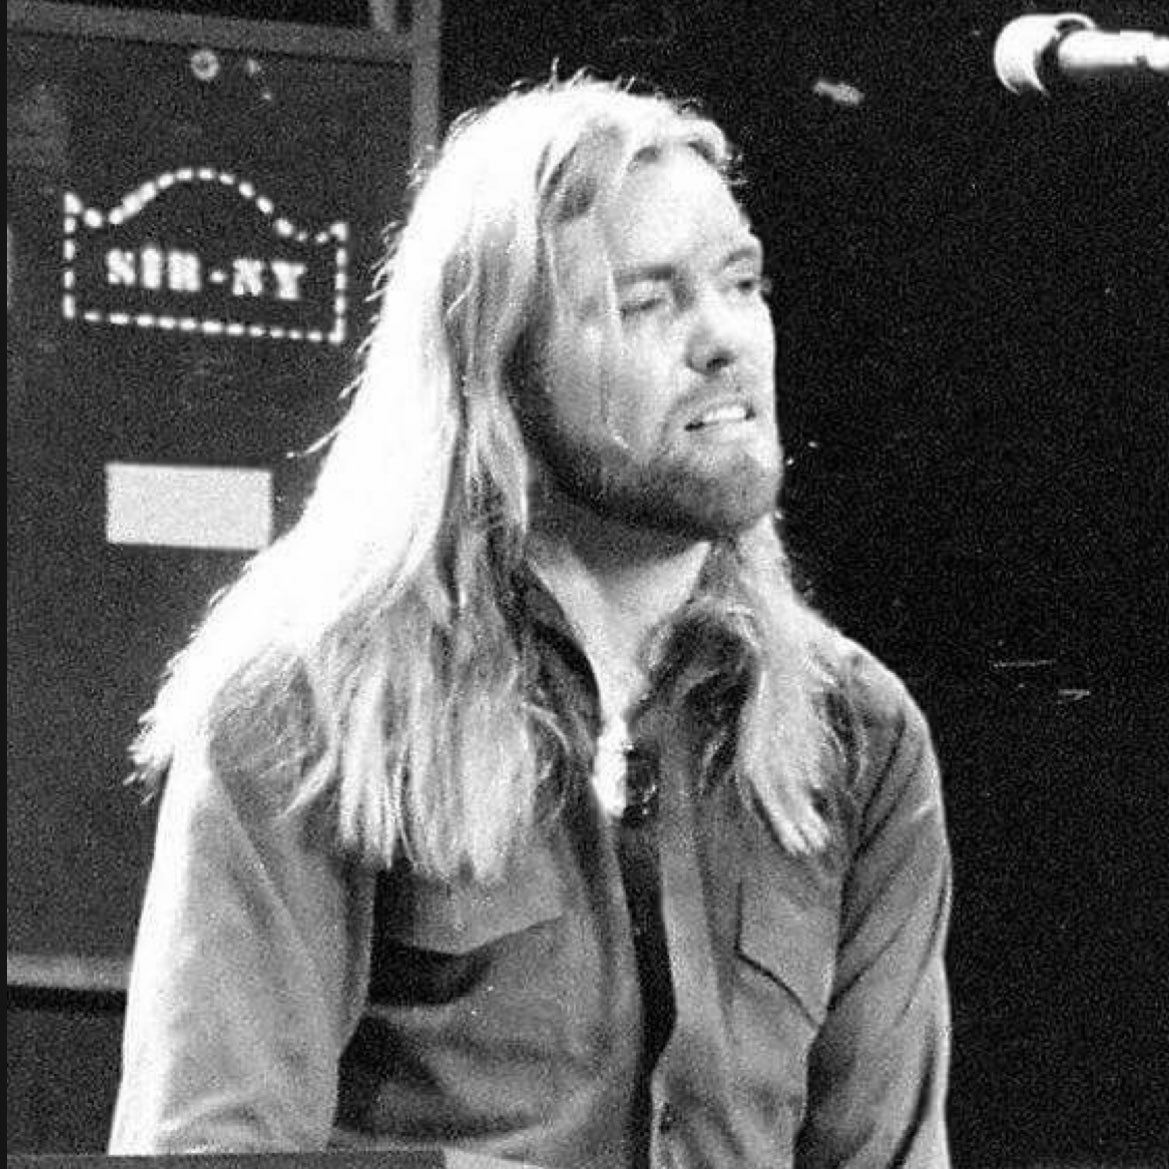 Remembering Gregg Allman,who reunited with Duane on this day in 2017!  The Music Lives on #GreggAllman #AllmanBrothers